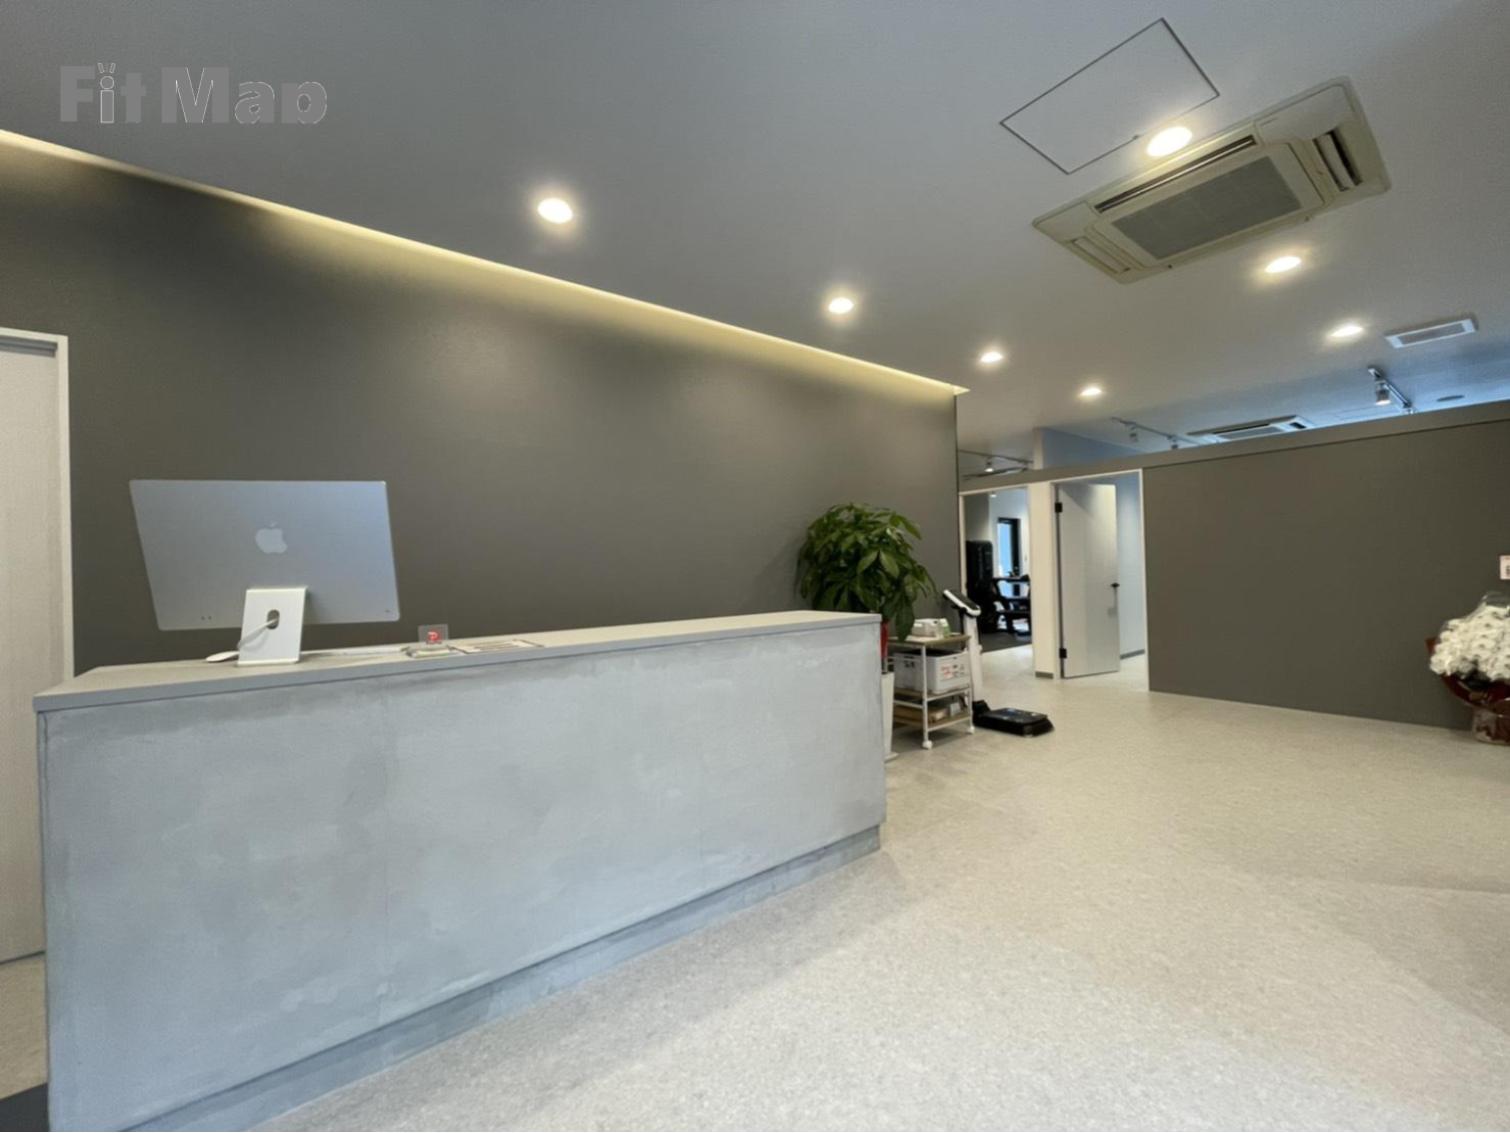 Relaxation&Personal gym WiLL 別府店の施設画像